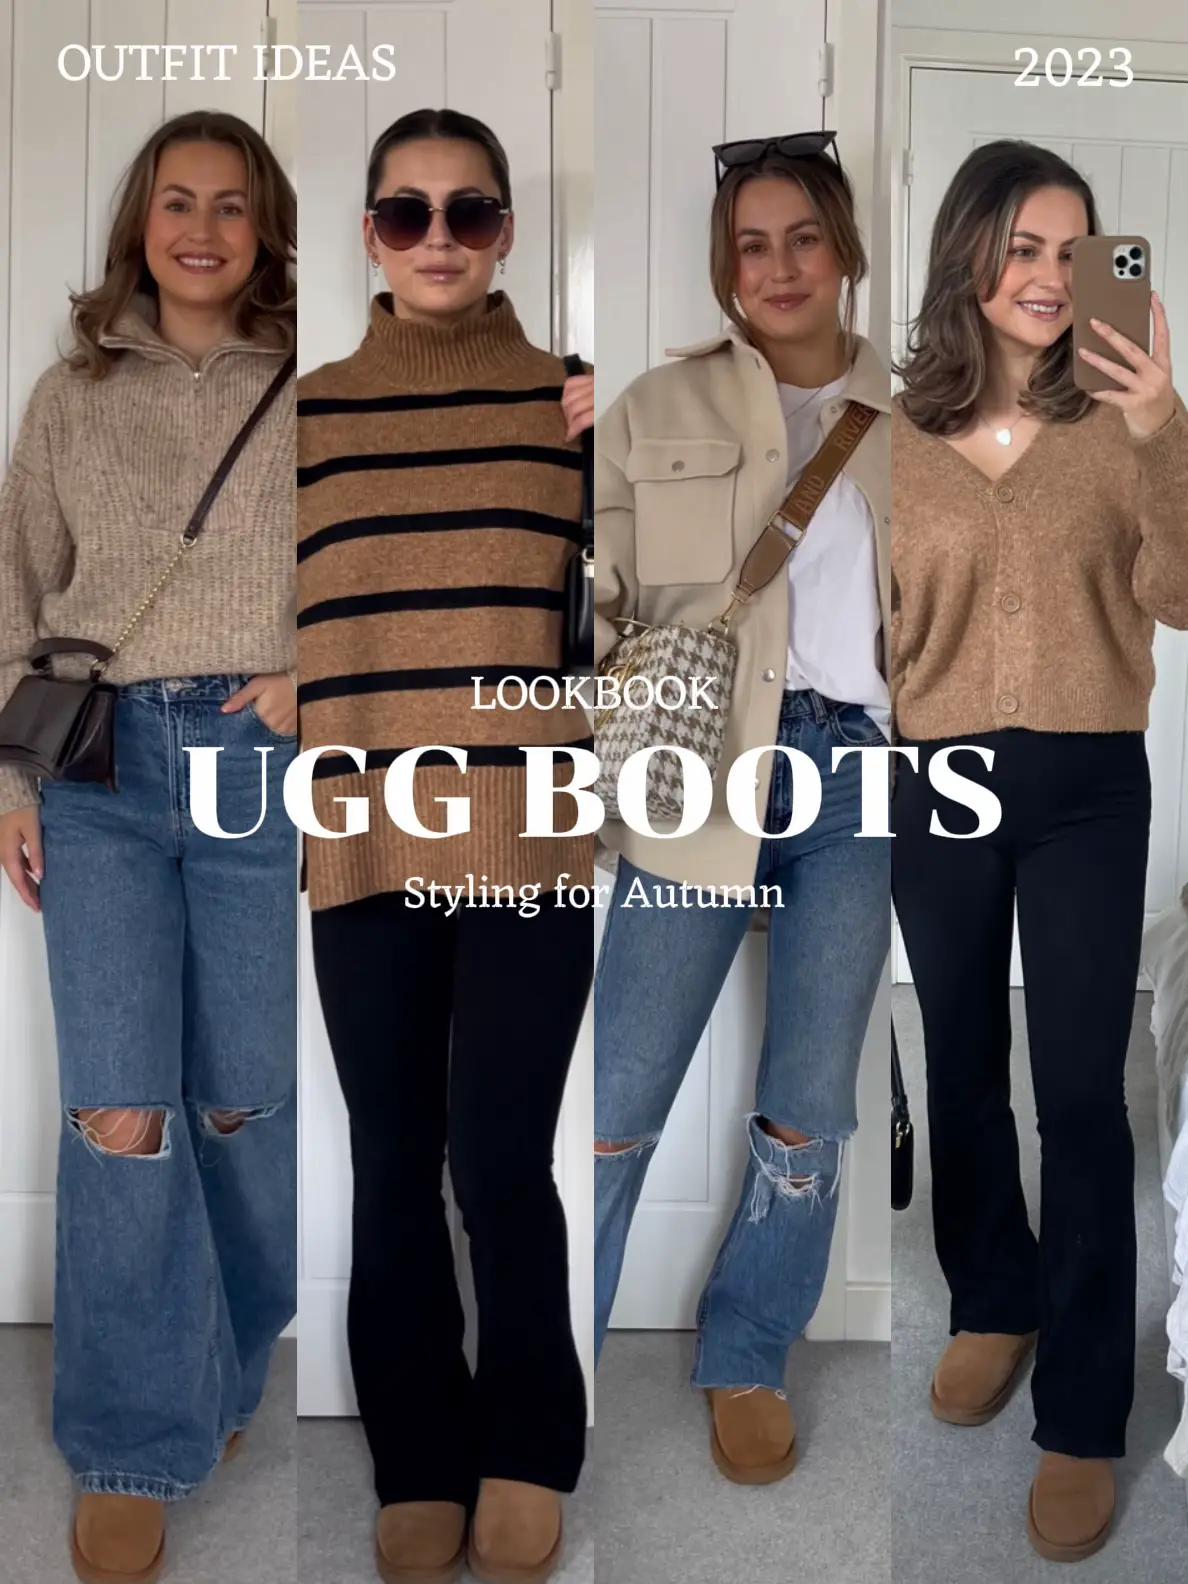 STYLE YOUR UGGS this autumn 👏🏻🍂🫶🏻, Gallery posted by sydwindow